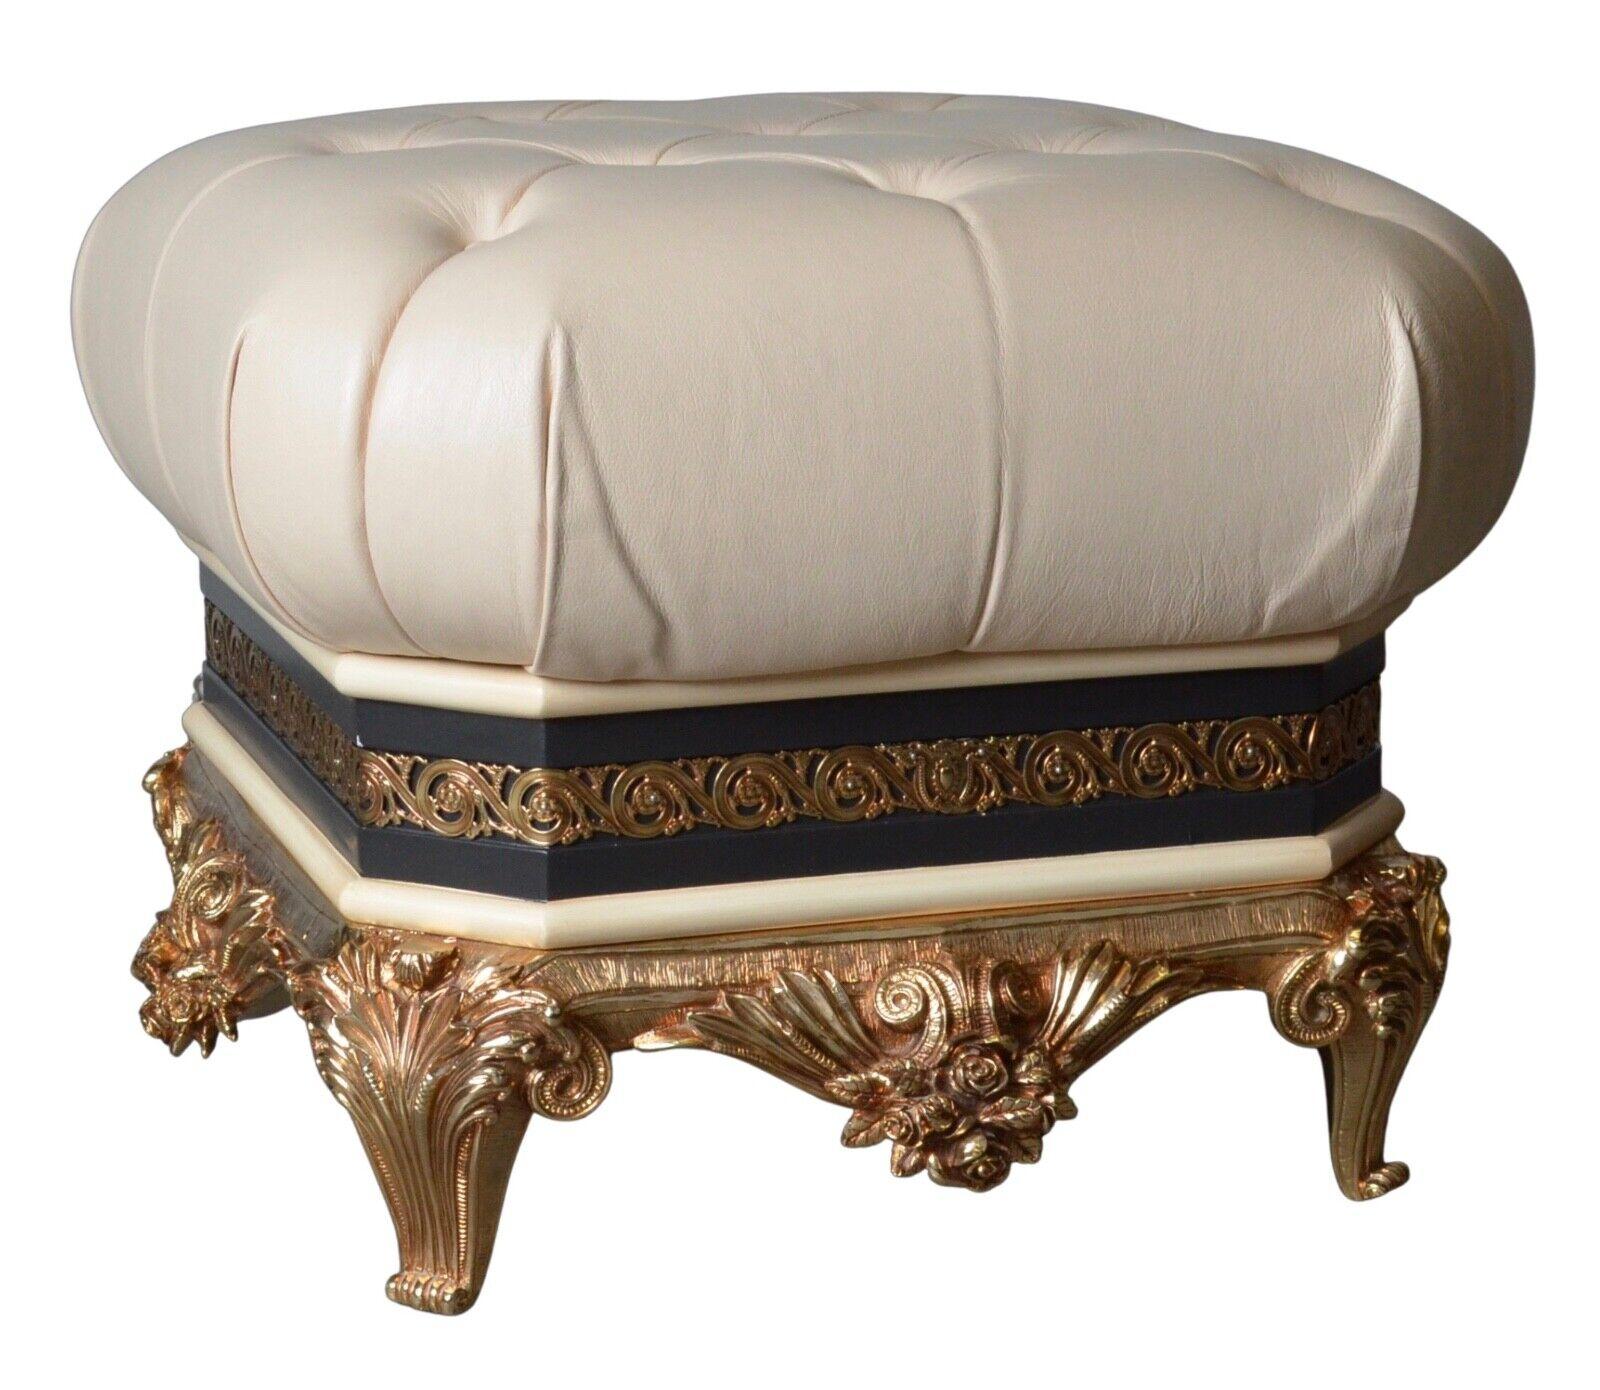 Hand-Crafted Exclusive circa 1970 Rococo Vidal Grau Footstool, Matching Furniture Available For Sale